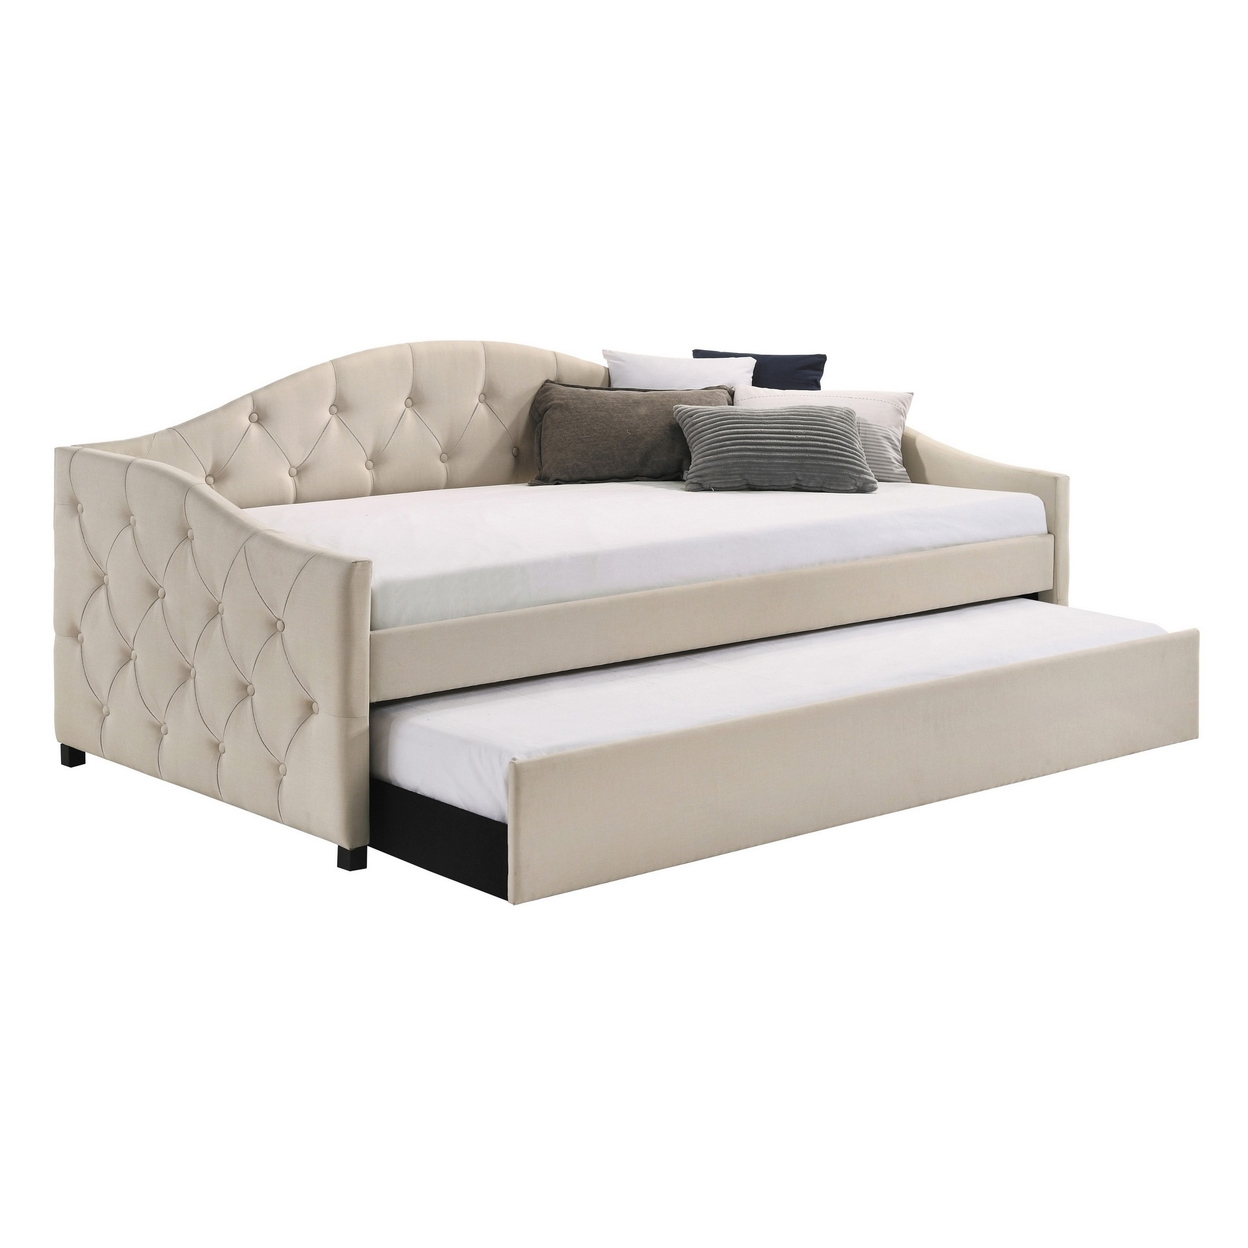 Mosh Twin Daybed With Trundle, Camel Back, Tufted, Taupe Beige Upholstery- Saltoro Sherpi